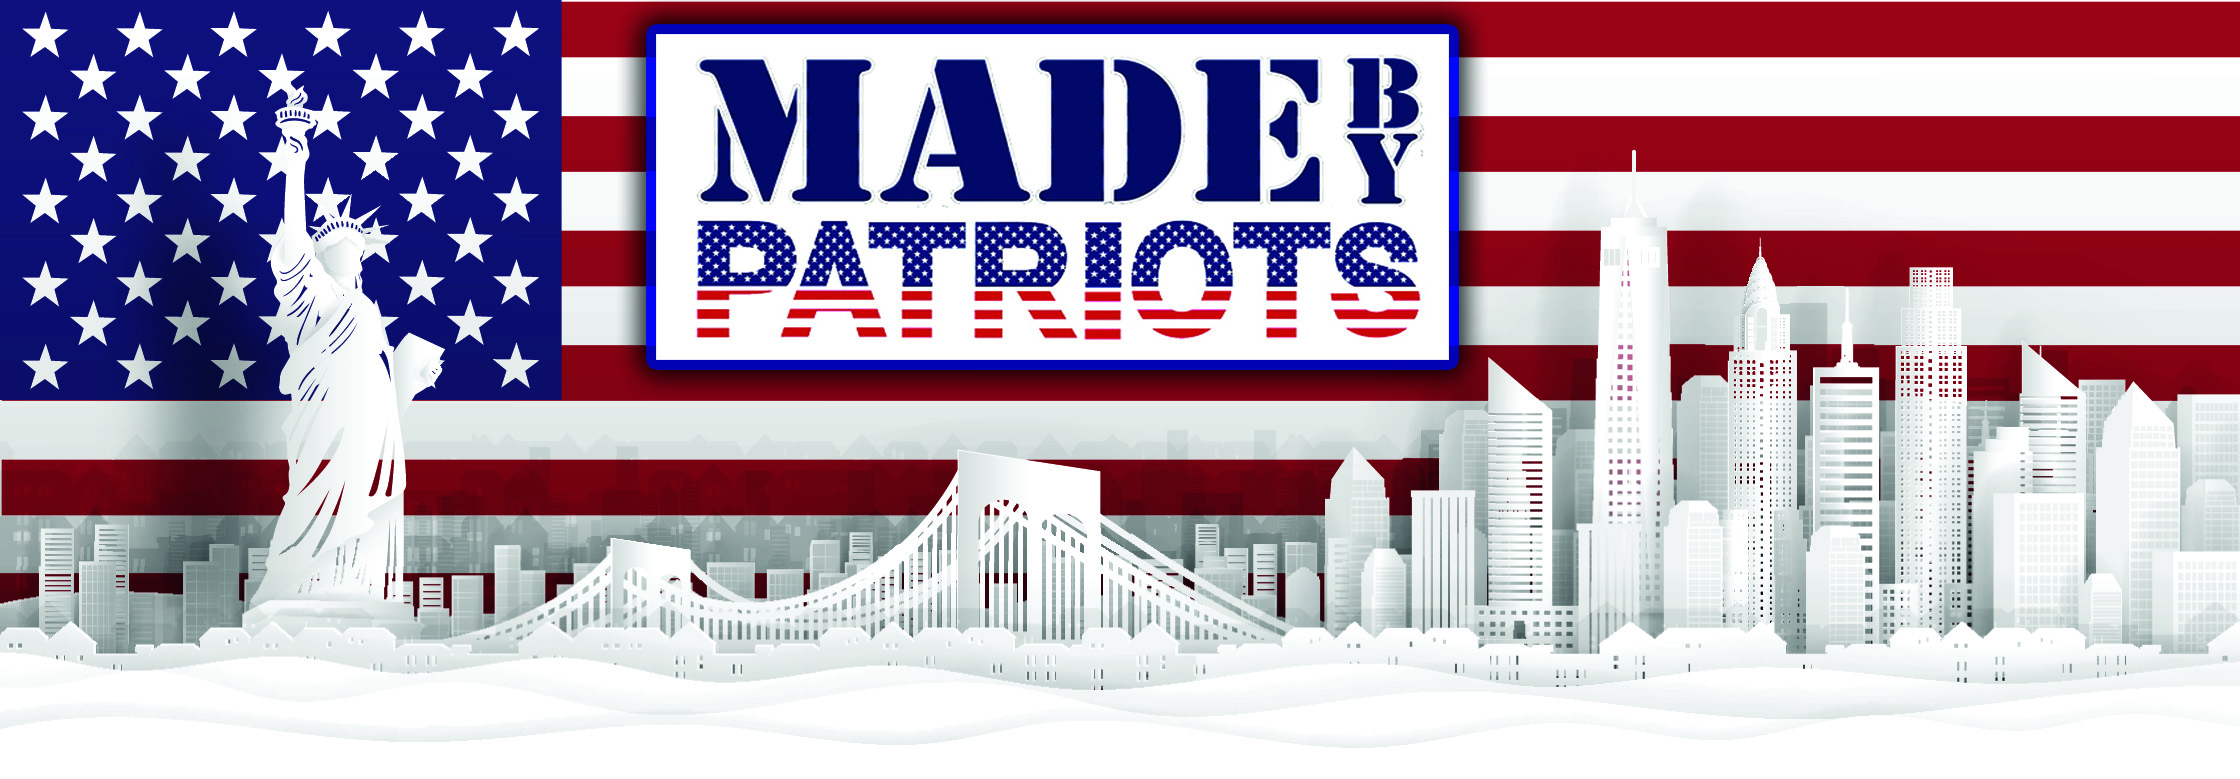 made-by-patriots-home-banner